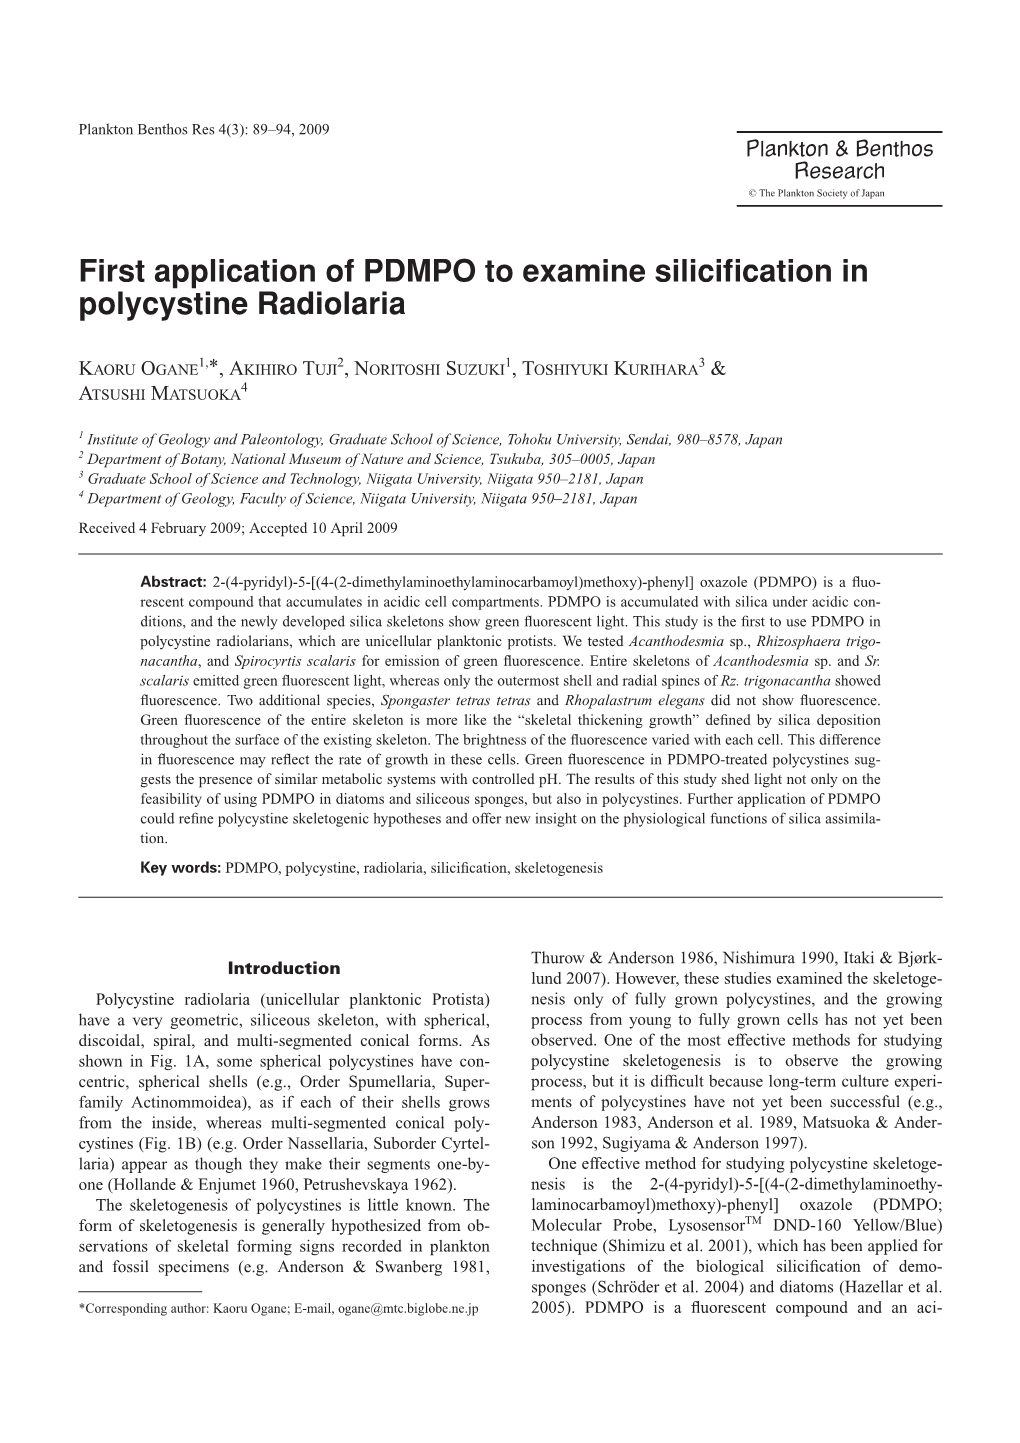 First Application of PDMPO to Examine Silicification in Polycystine Radiolaria